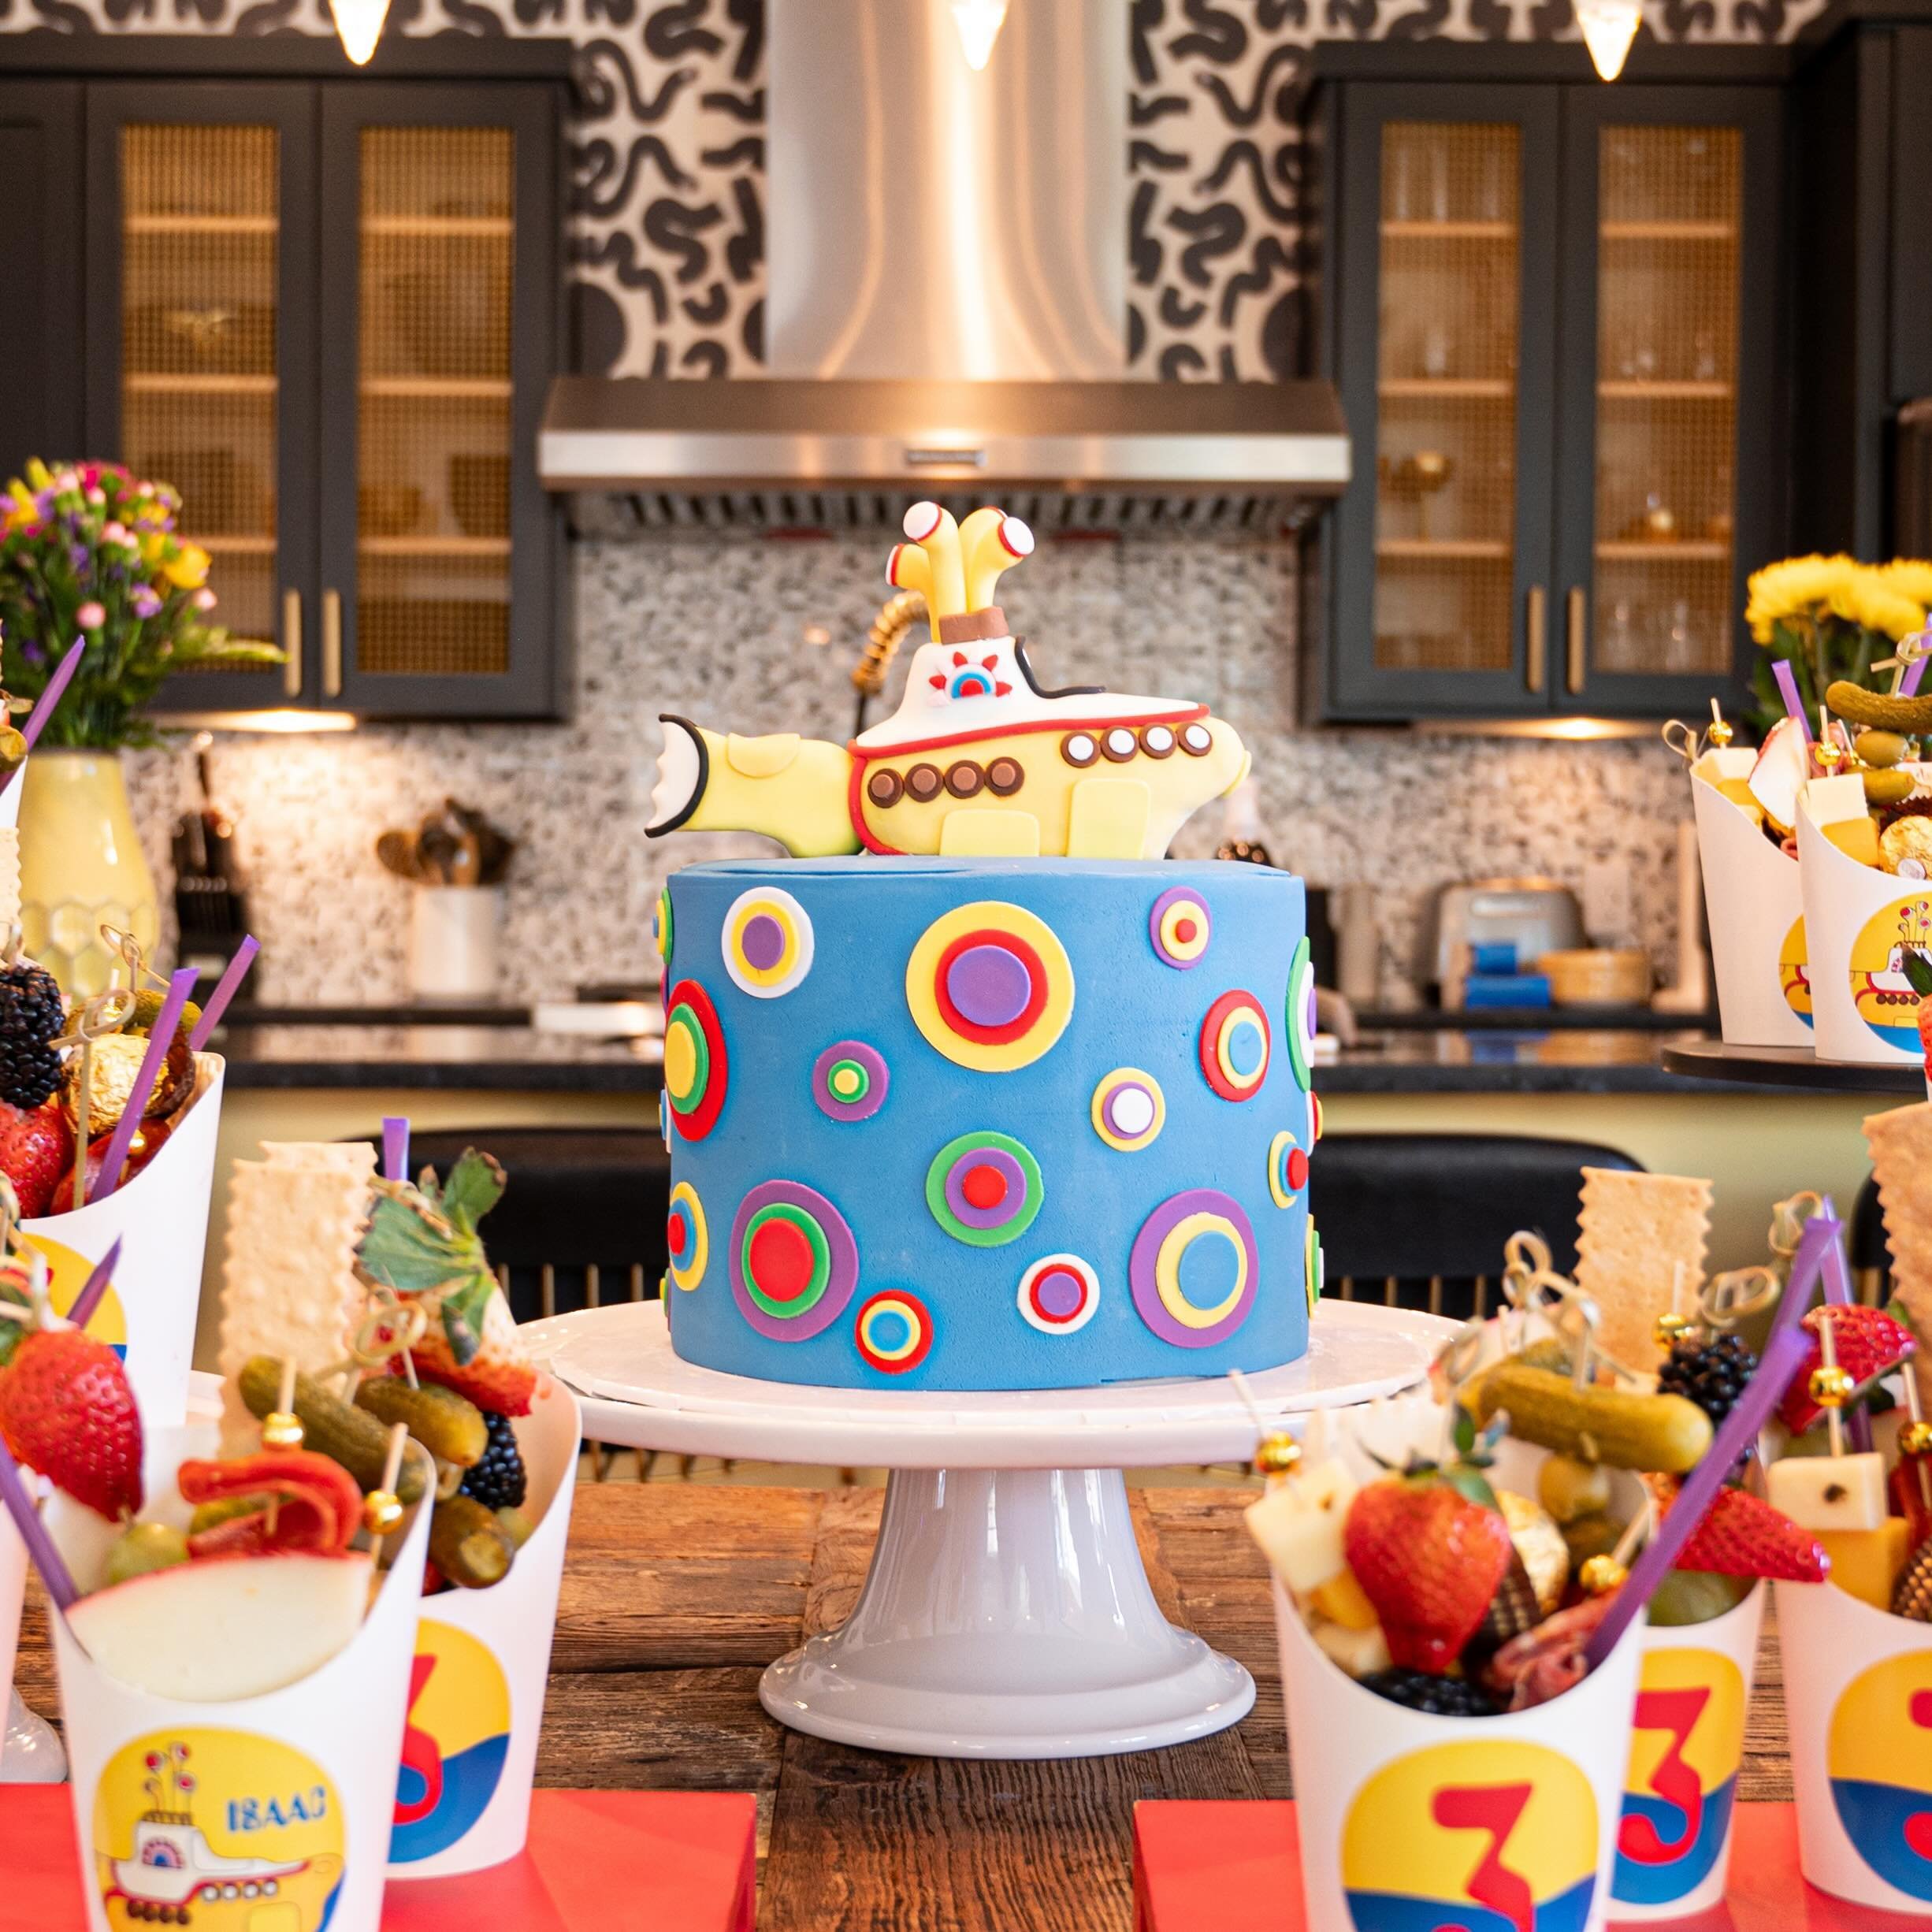 How groovy is the cake?? Absolutely loved the theme!  #atxeventplanner #austineventplanner #atxkids #atxmoms